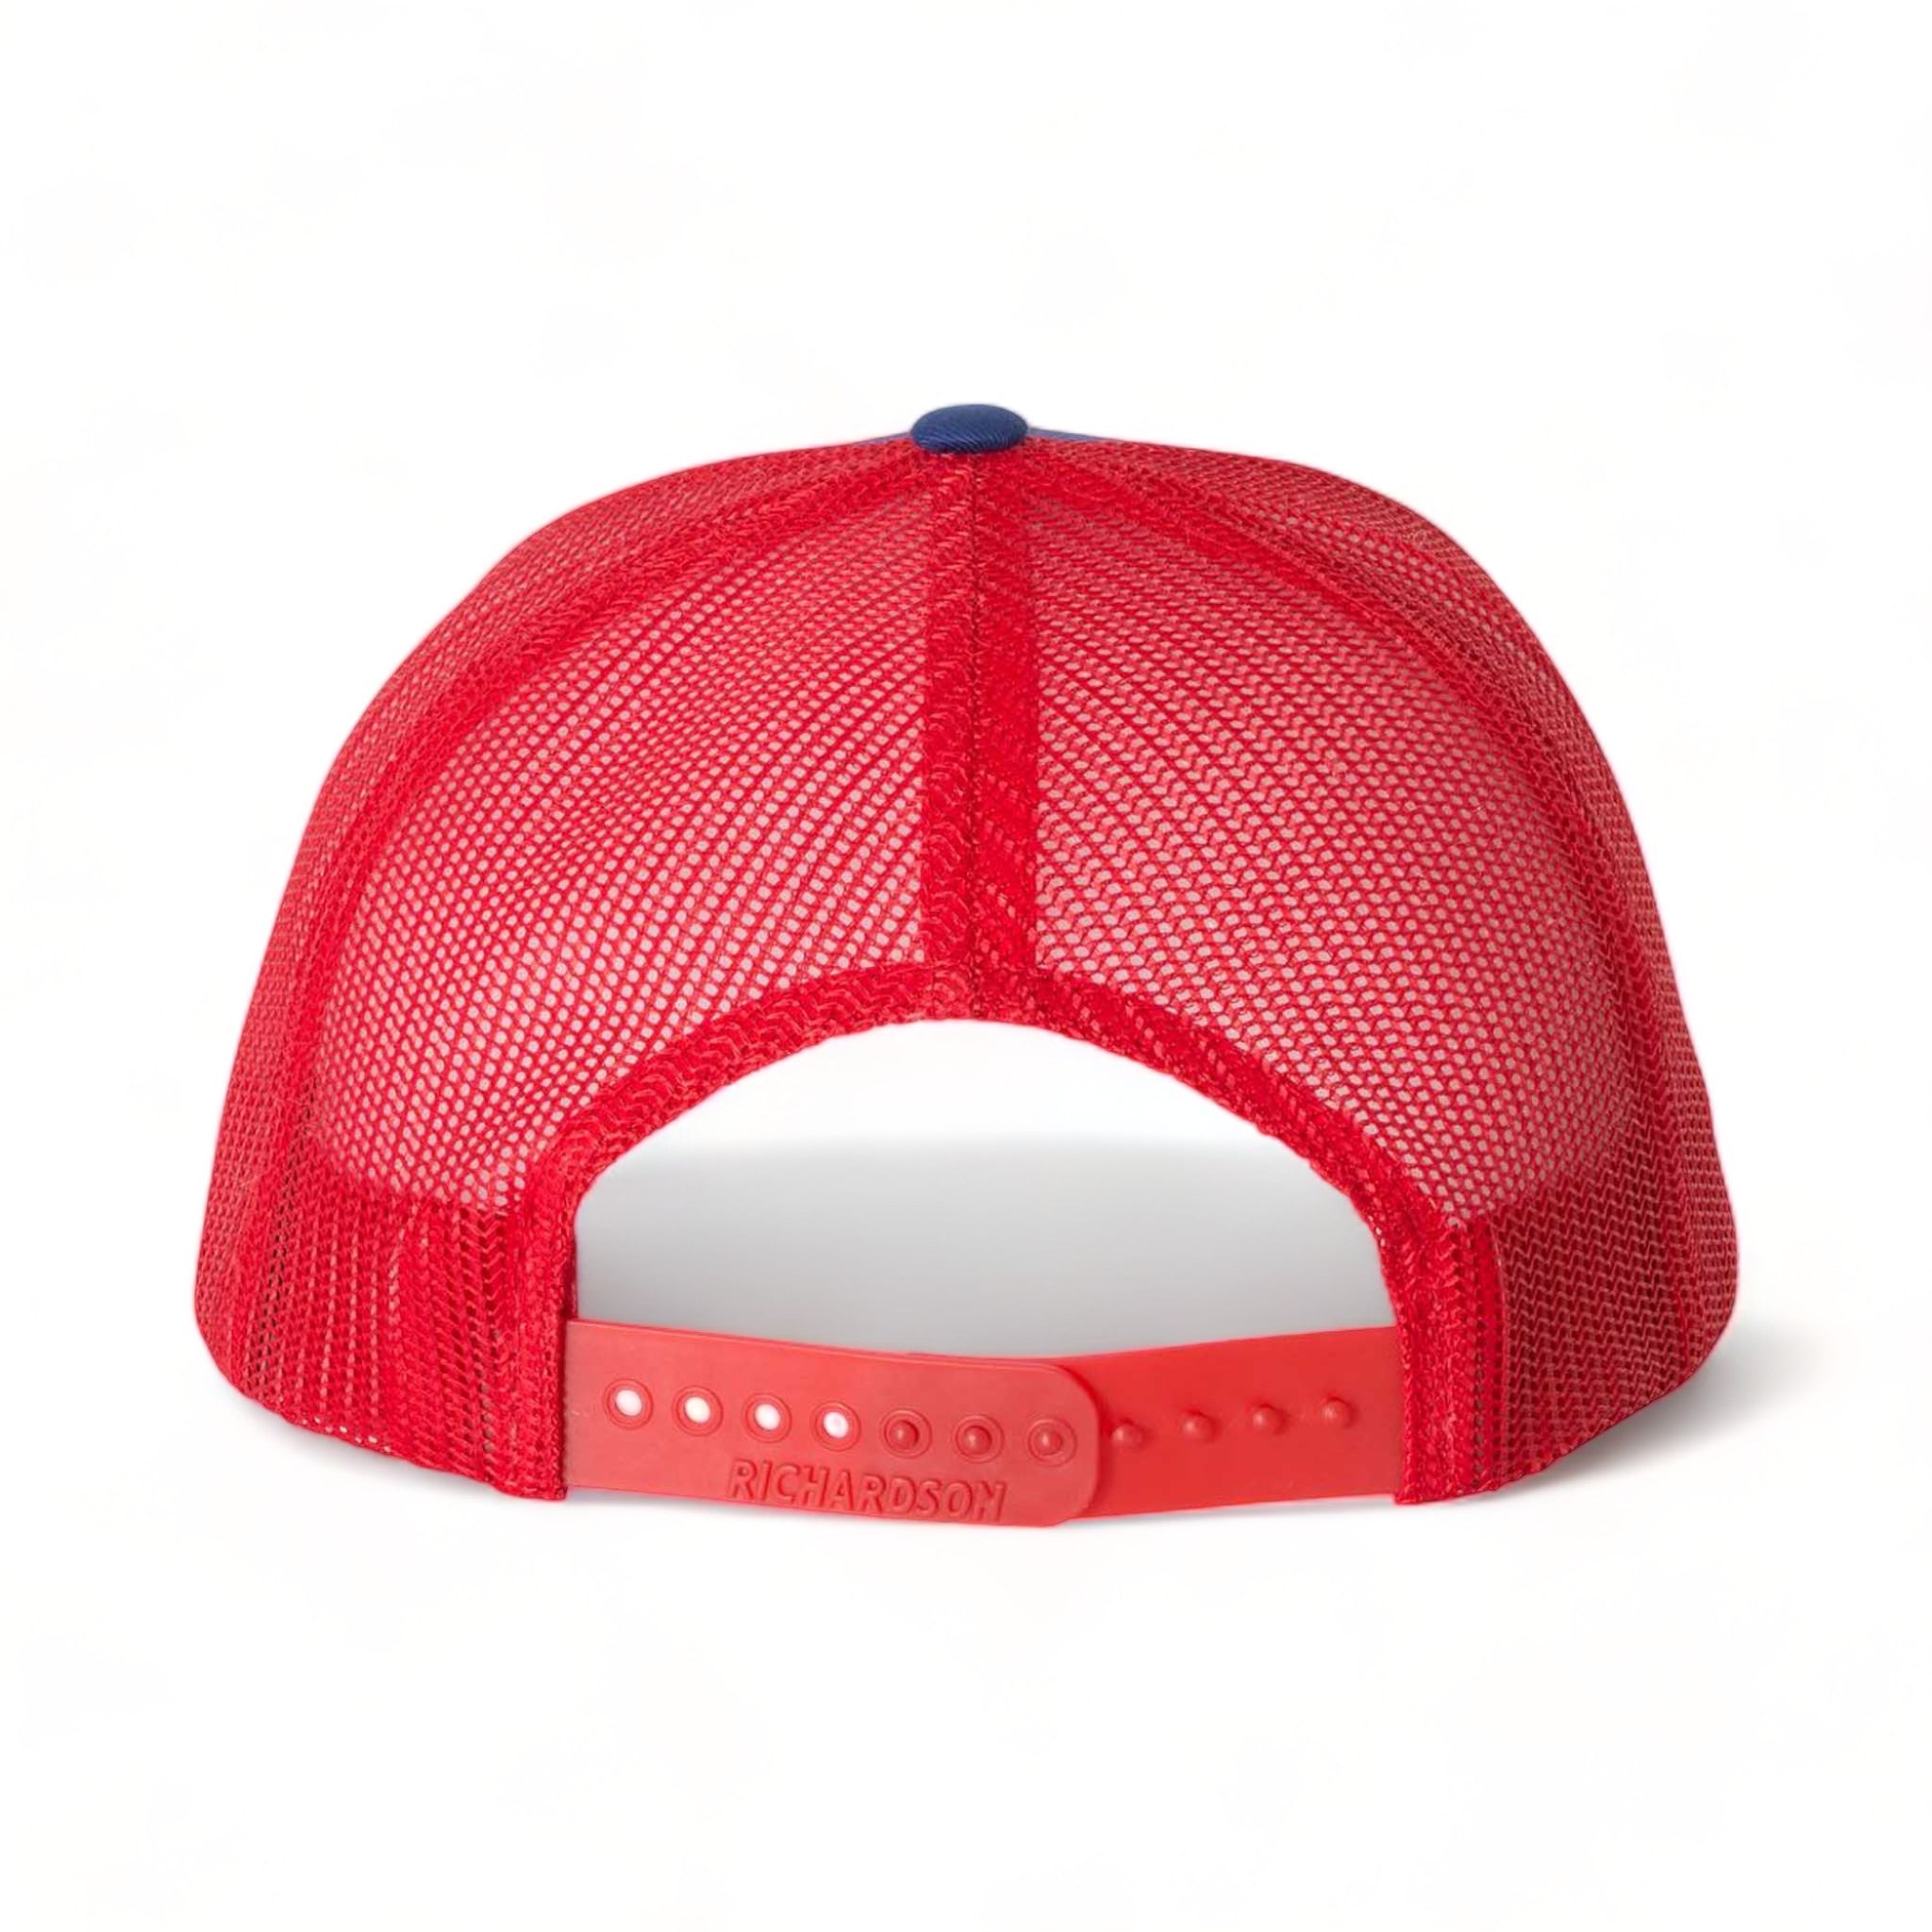 Back view of Richardson 112 custom hat in royal and red